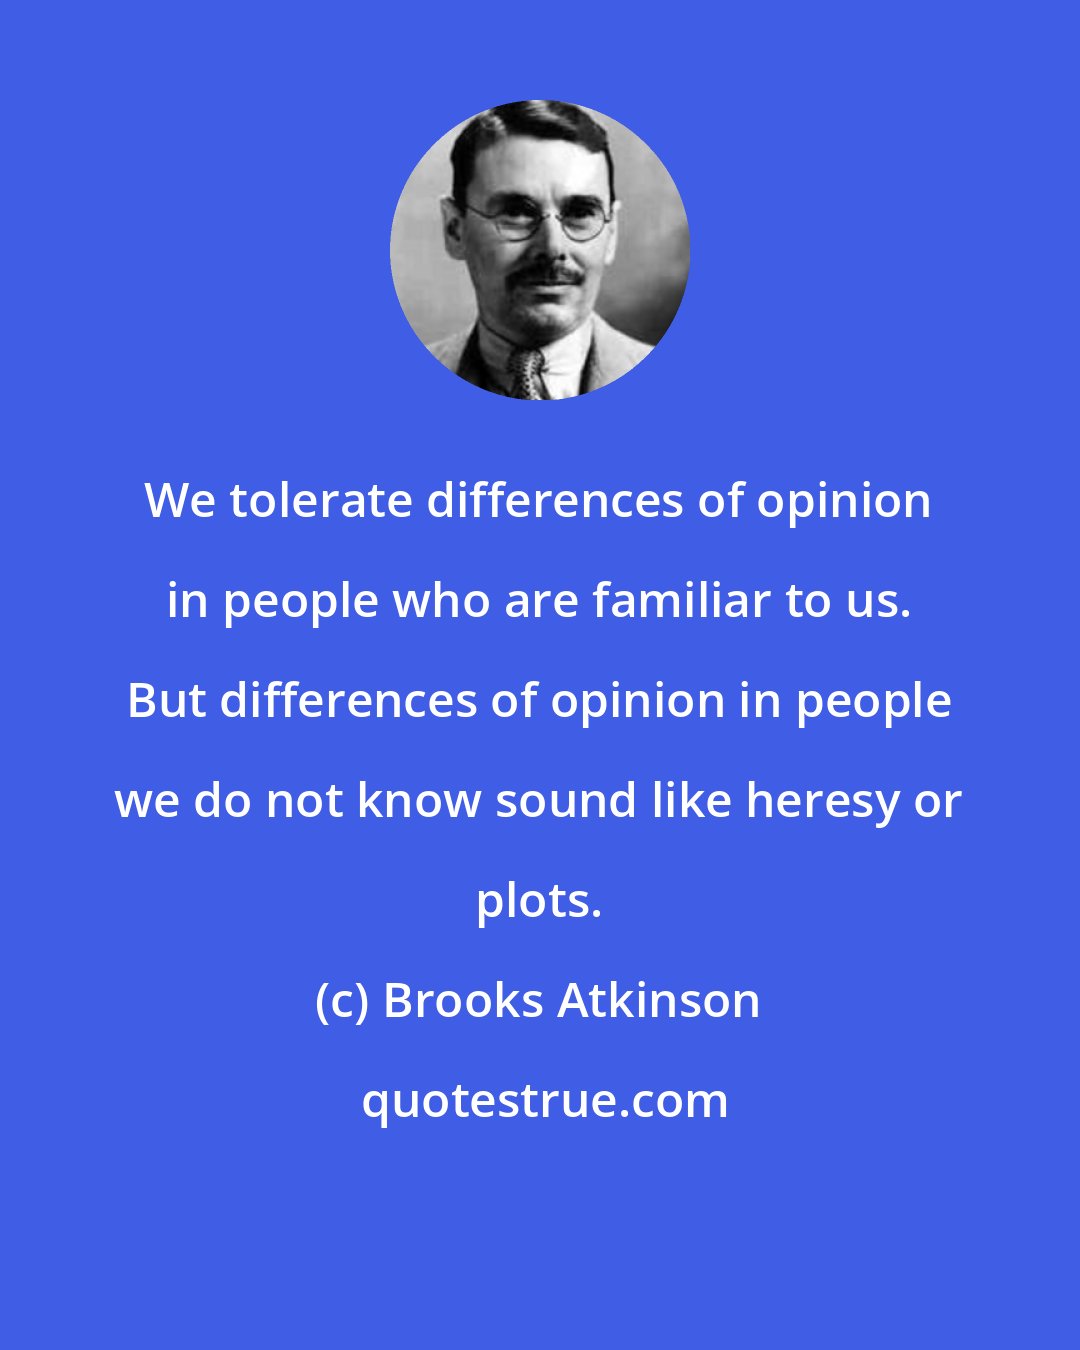 Brooks Atkinson: We tolerate differences of opinion in people who are familiar to us. But differences of opinion in people we do not know sound like heresy or plots.